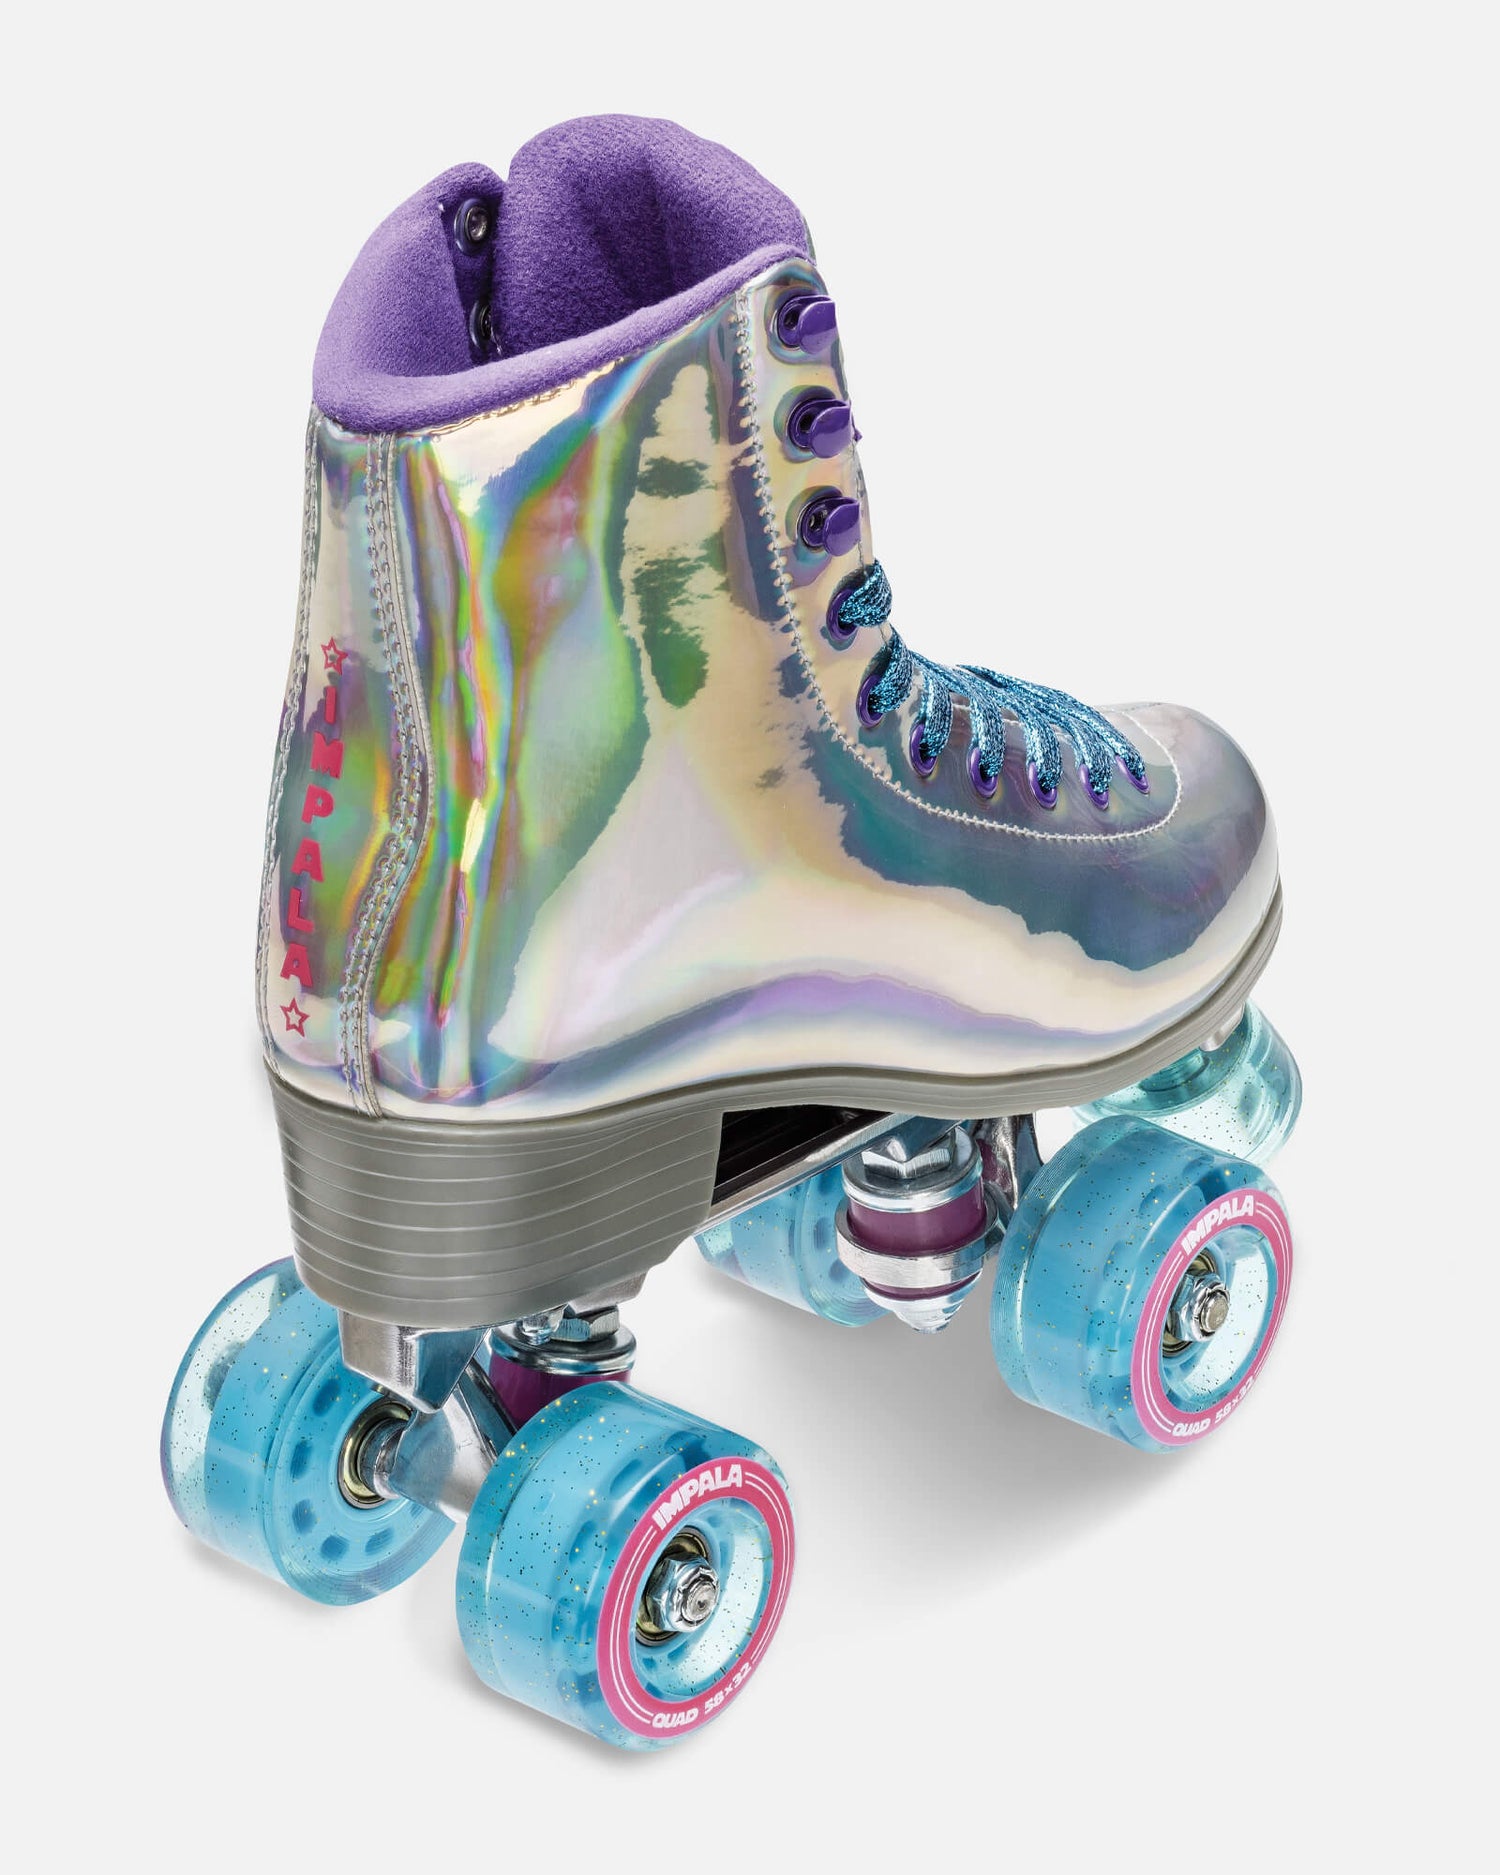 Impala Roller Skates Impala Roller Skates - Holographic in Holographic